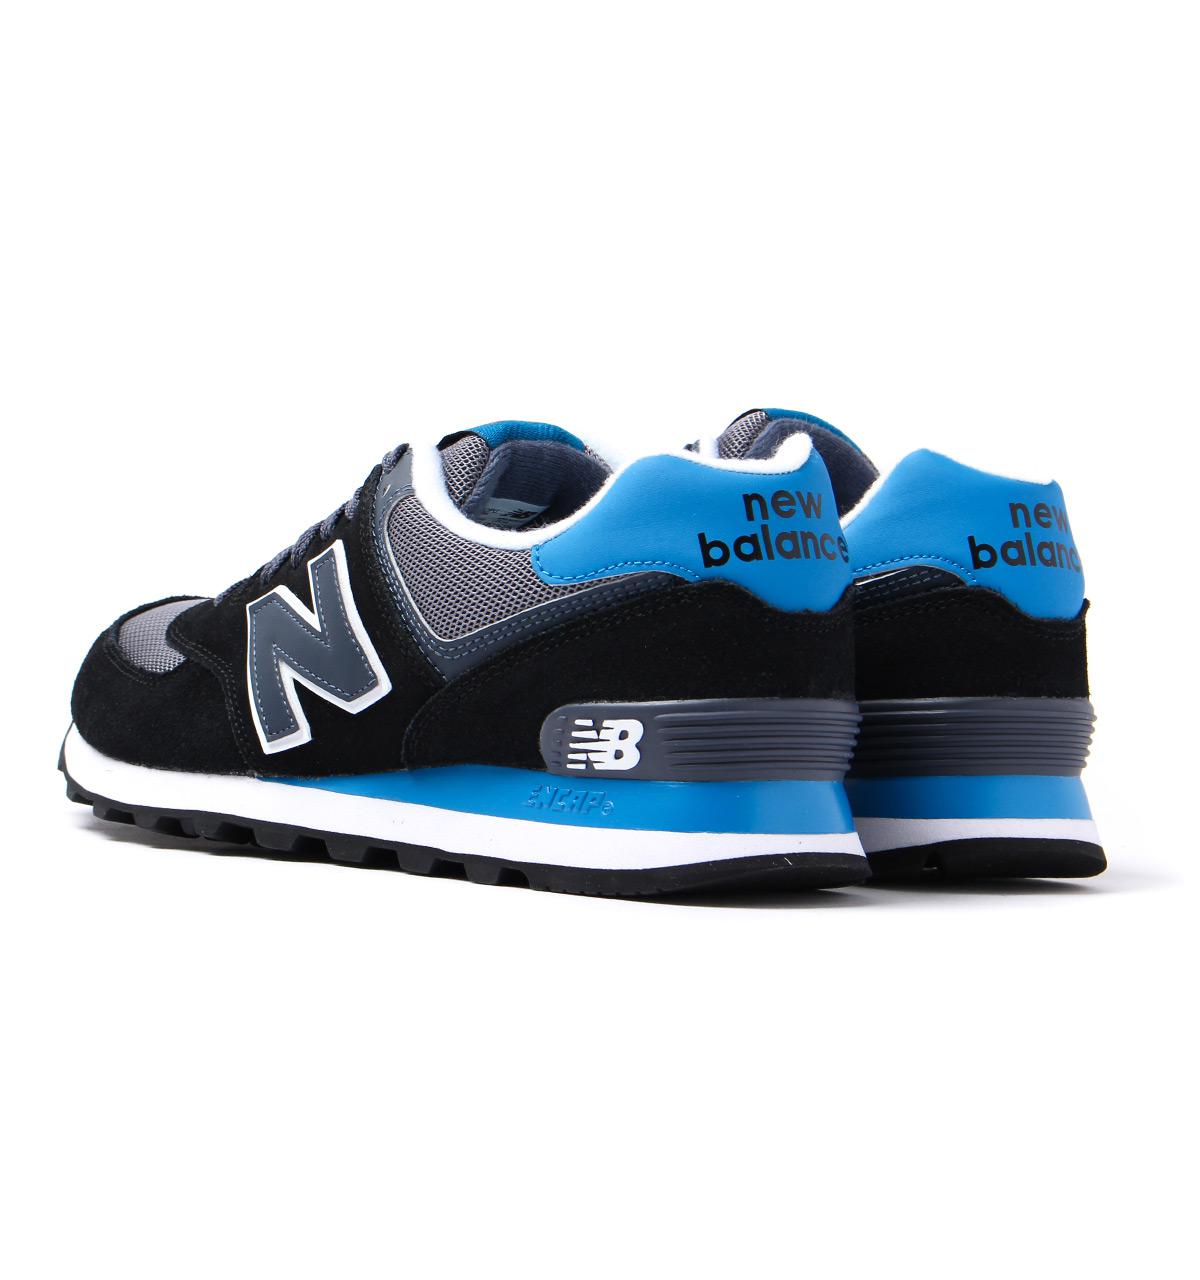 New Balance 574 Royal Blue & Black Sleek Suede Trainers for Men - Lyst